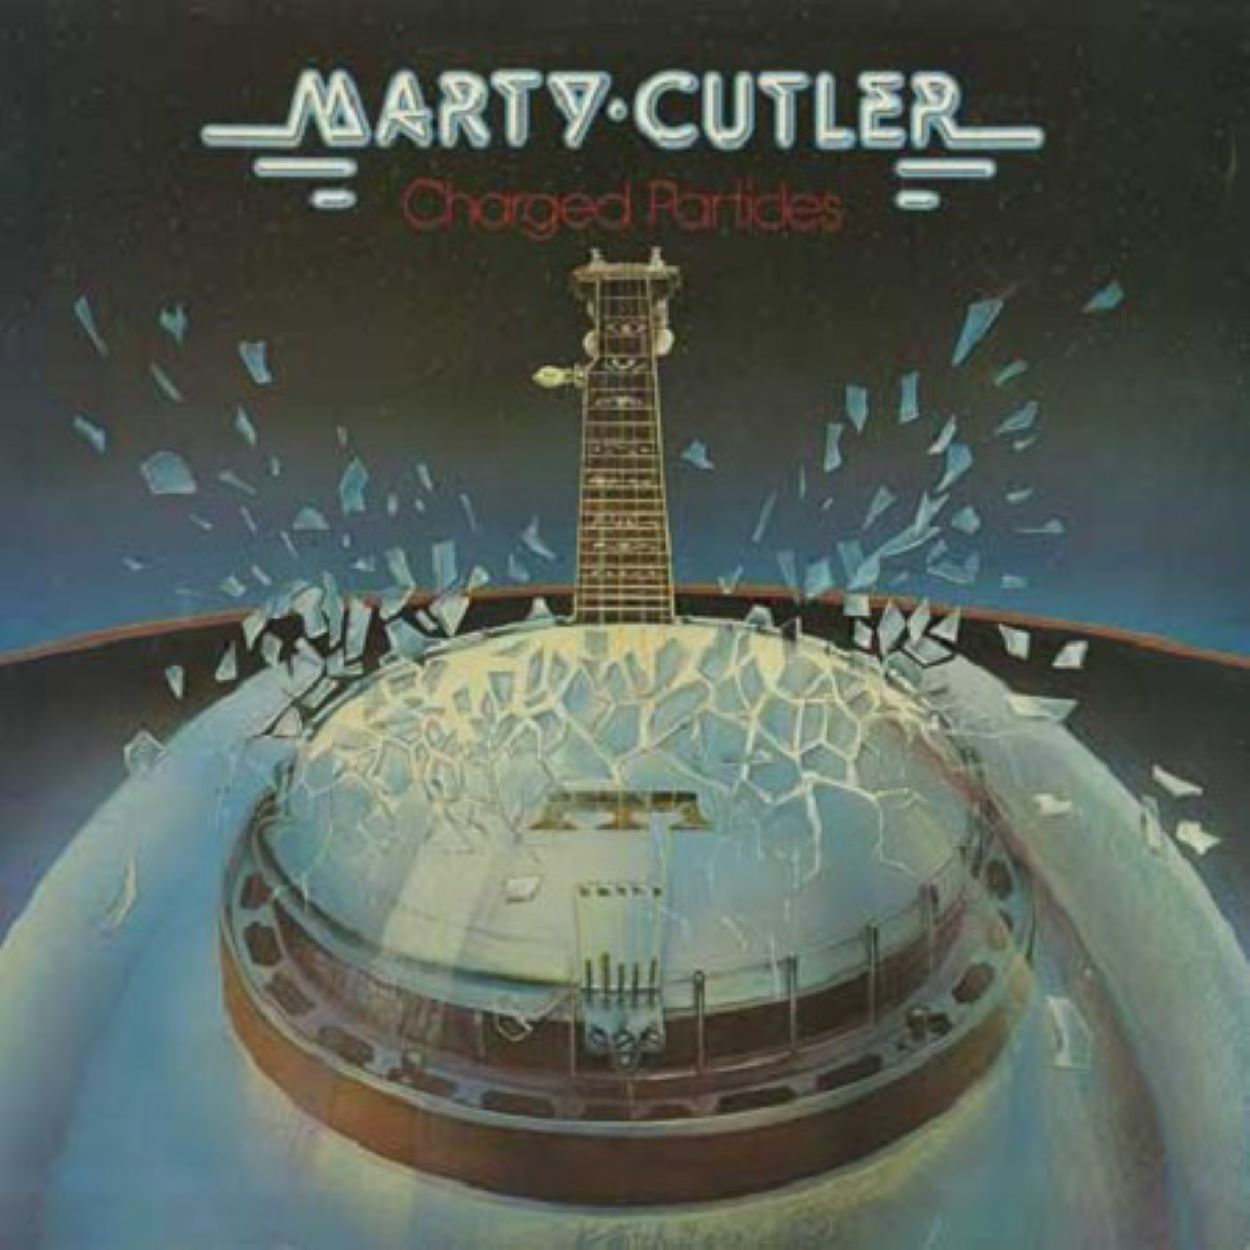 Marty Cutler - Charged Particles cover album